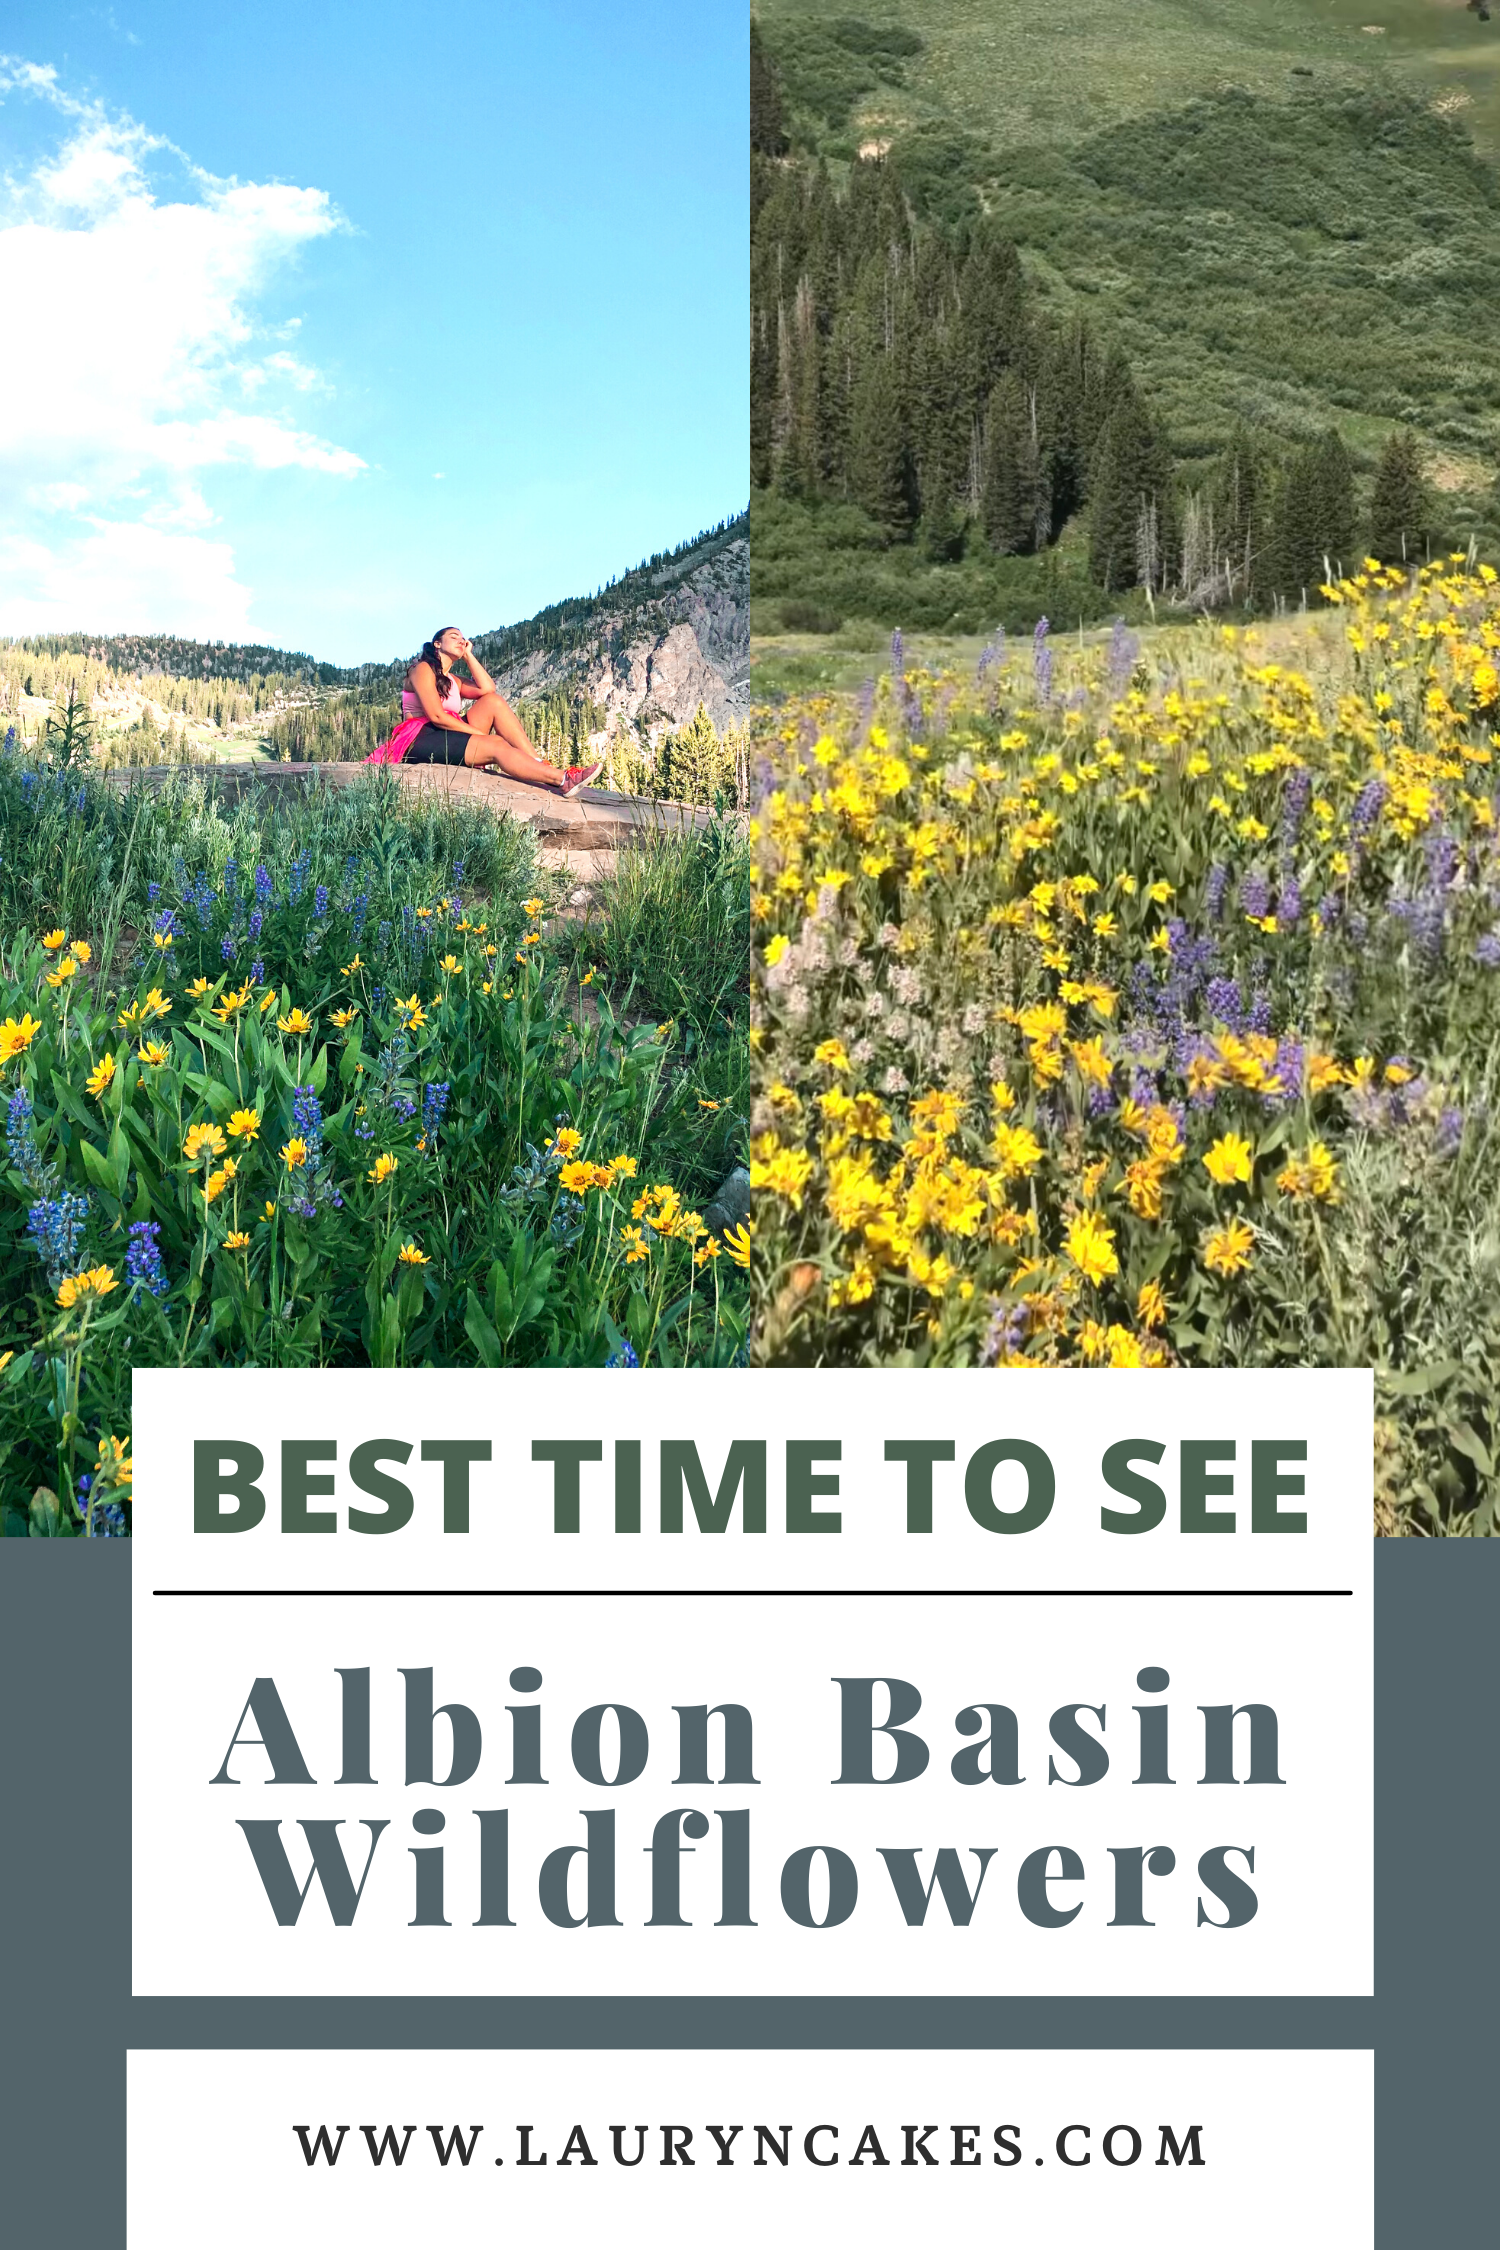 Two images in Salt Lake City, Utah Wasatch Mountains of flowers growing with the teaxt saying, "best time to see Albion Basin wildflowers"